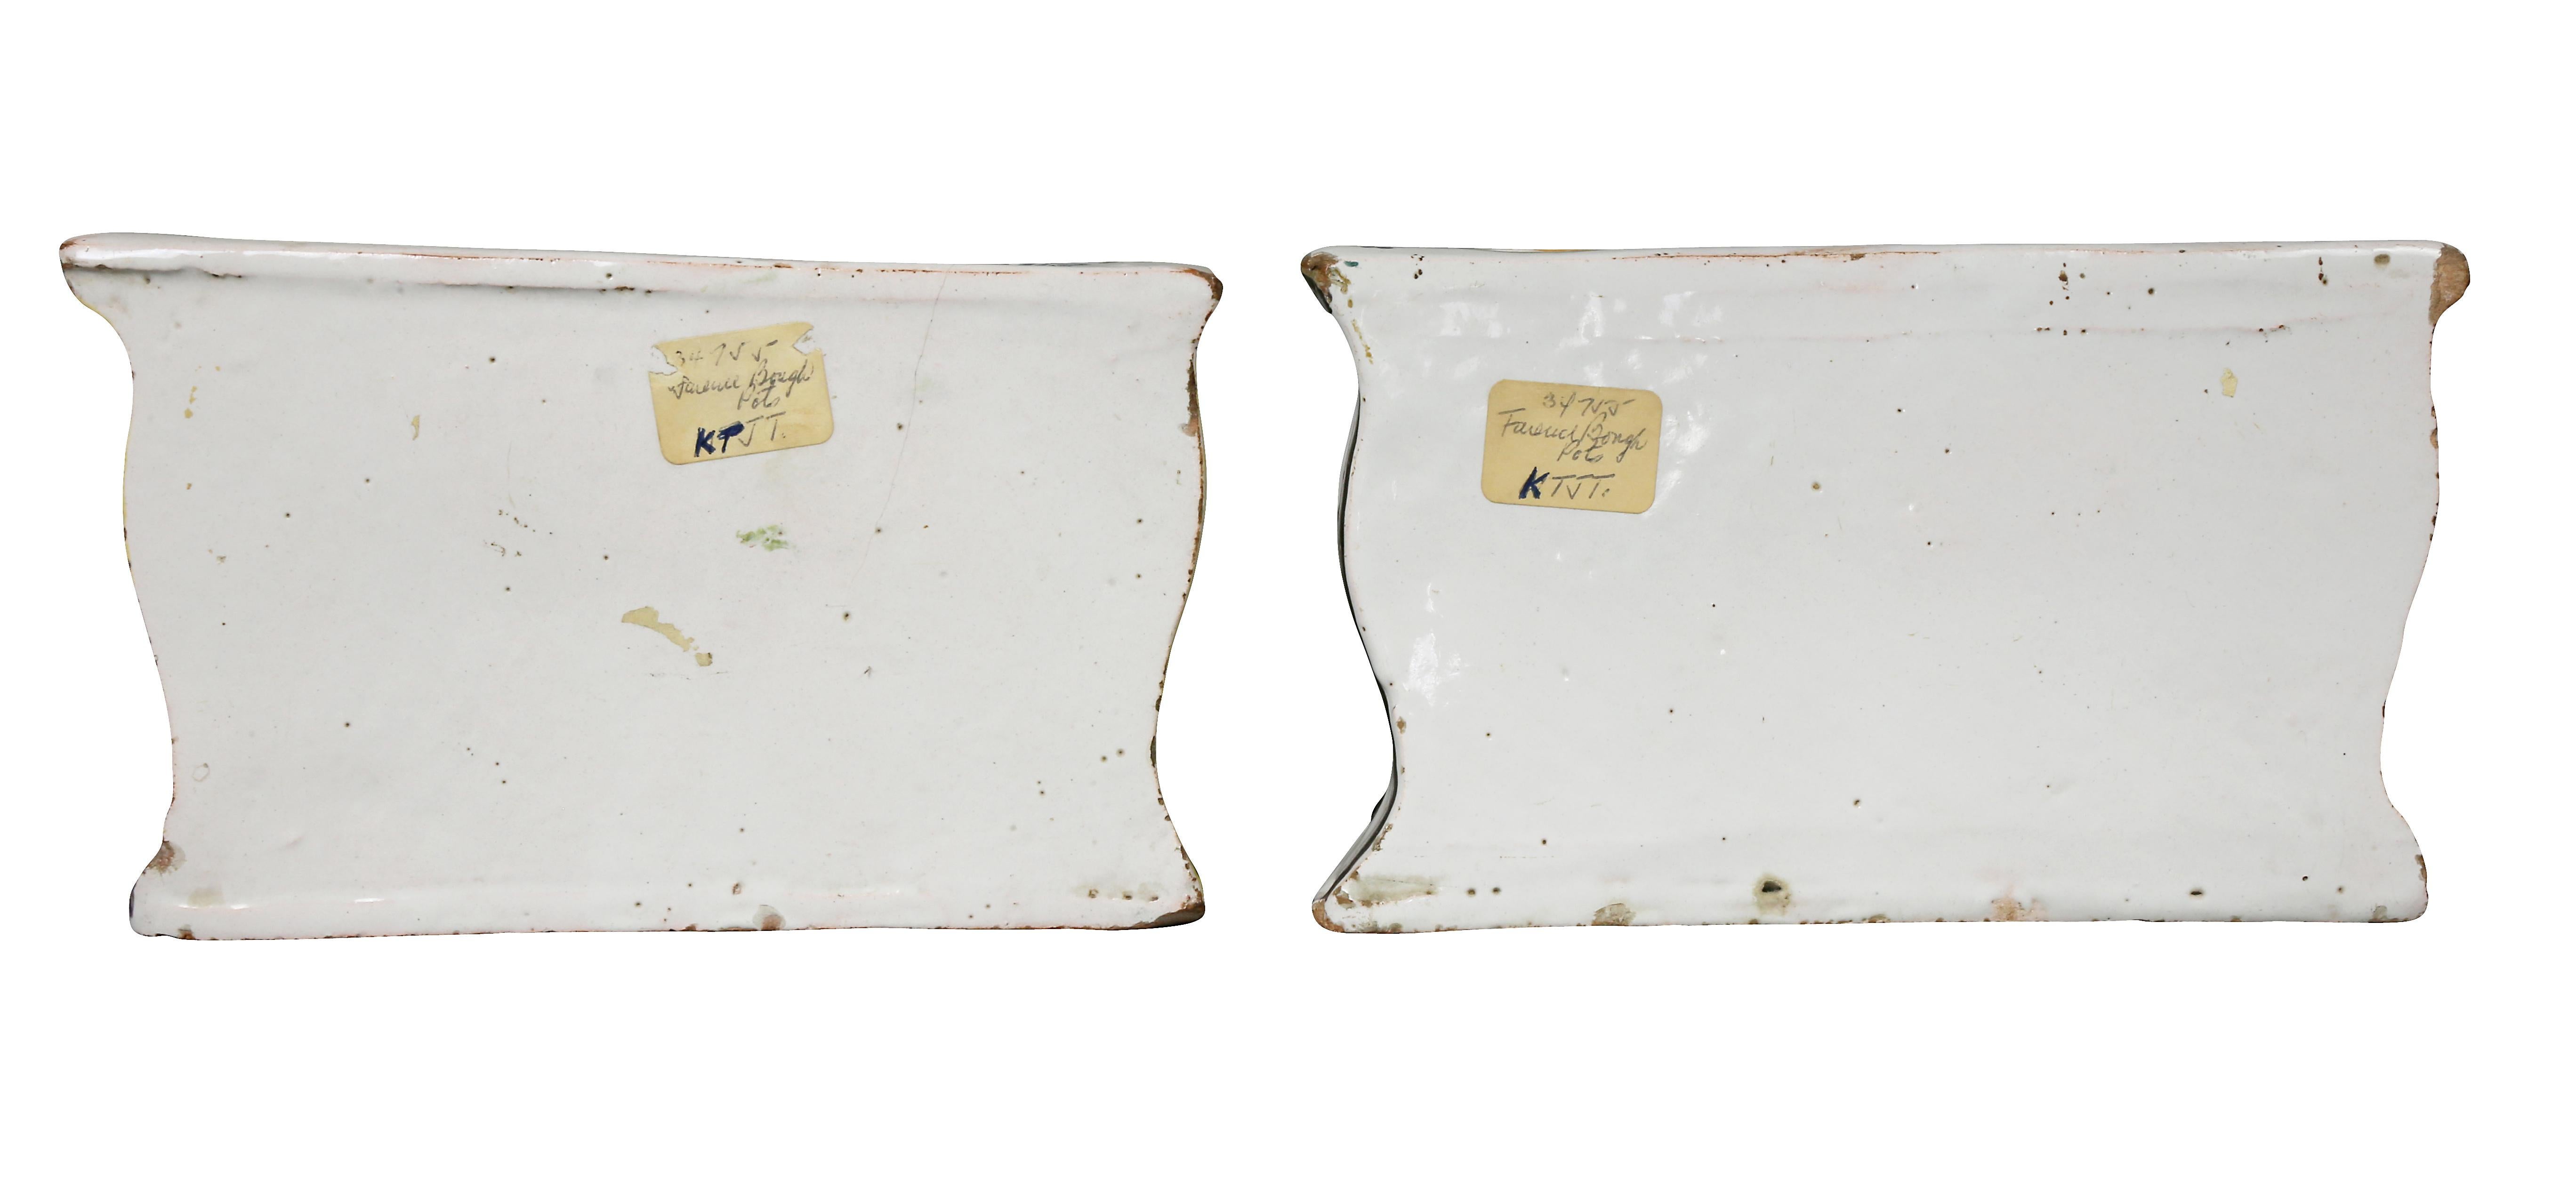 Pair of French Faience Bough Pots in the Form of Commodes For Sale 3